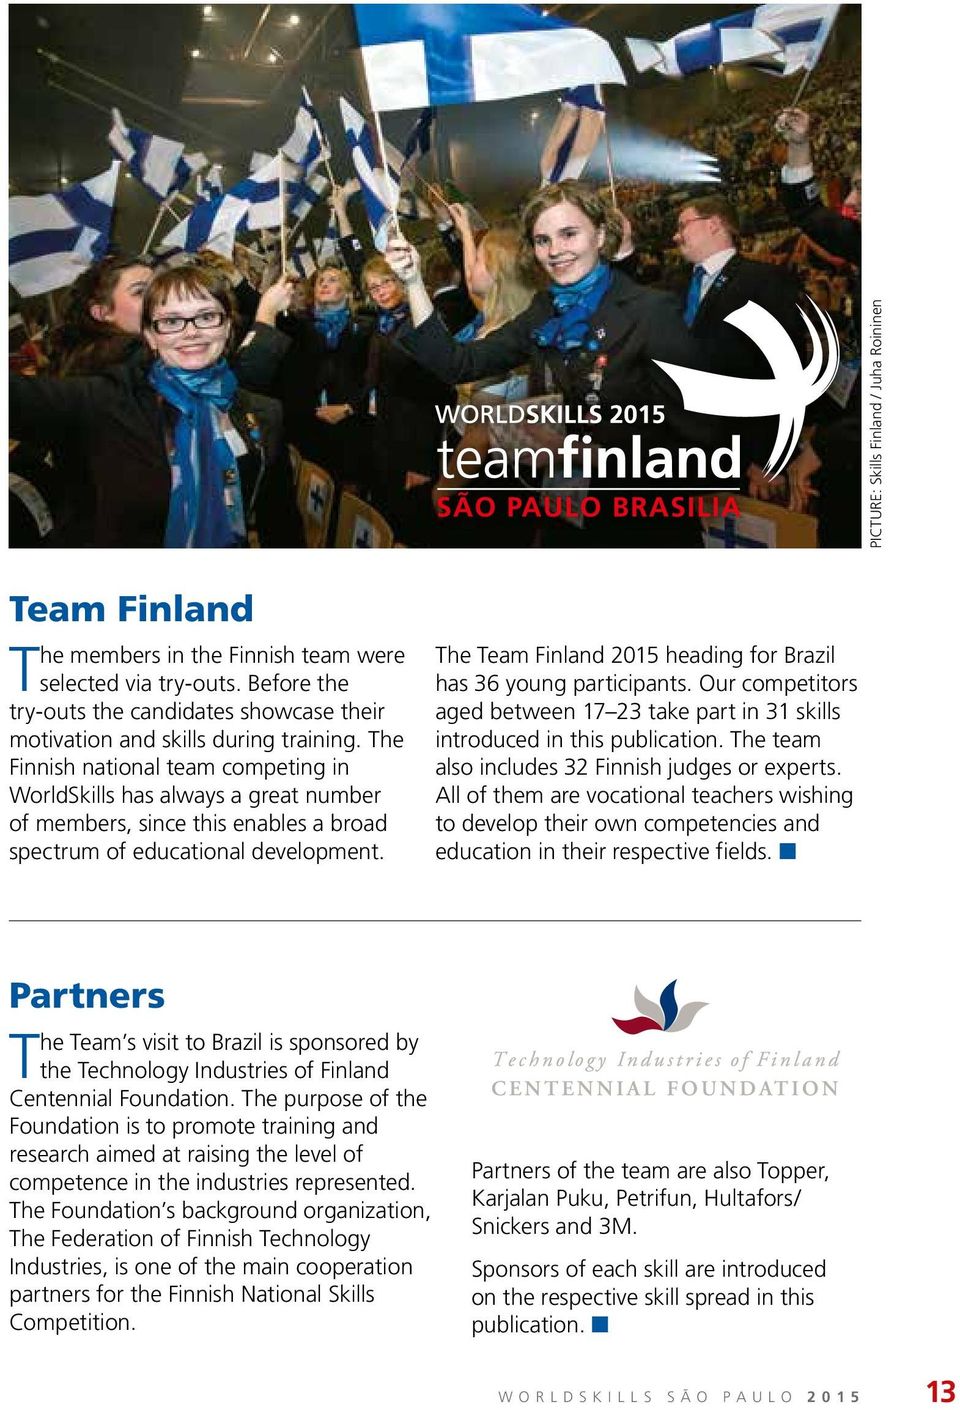 The Finnish national team competing in WorldSkills has always a great number of members, since this enables a broad spectrum of educational development.